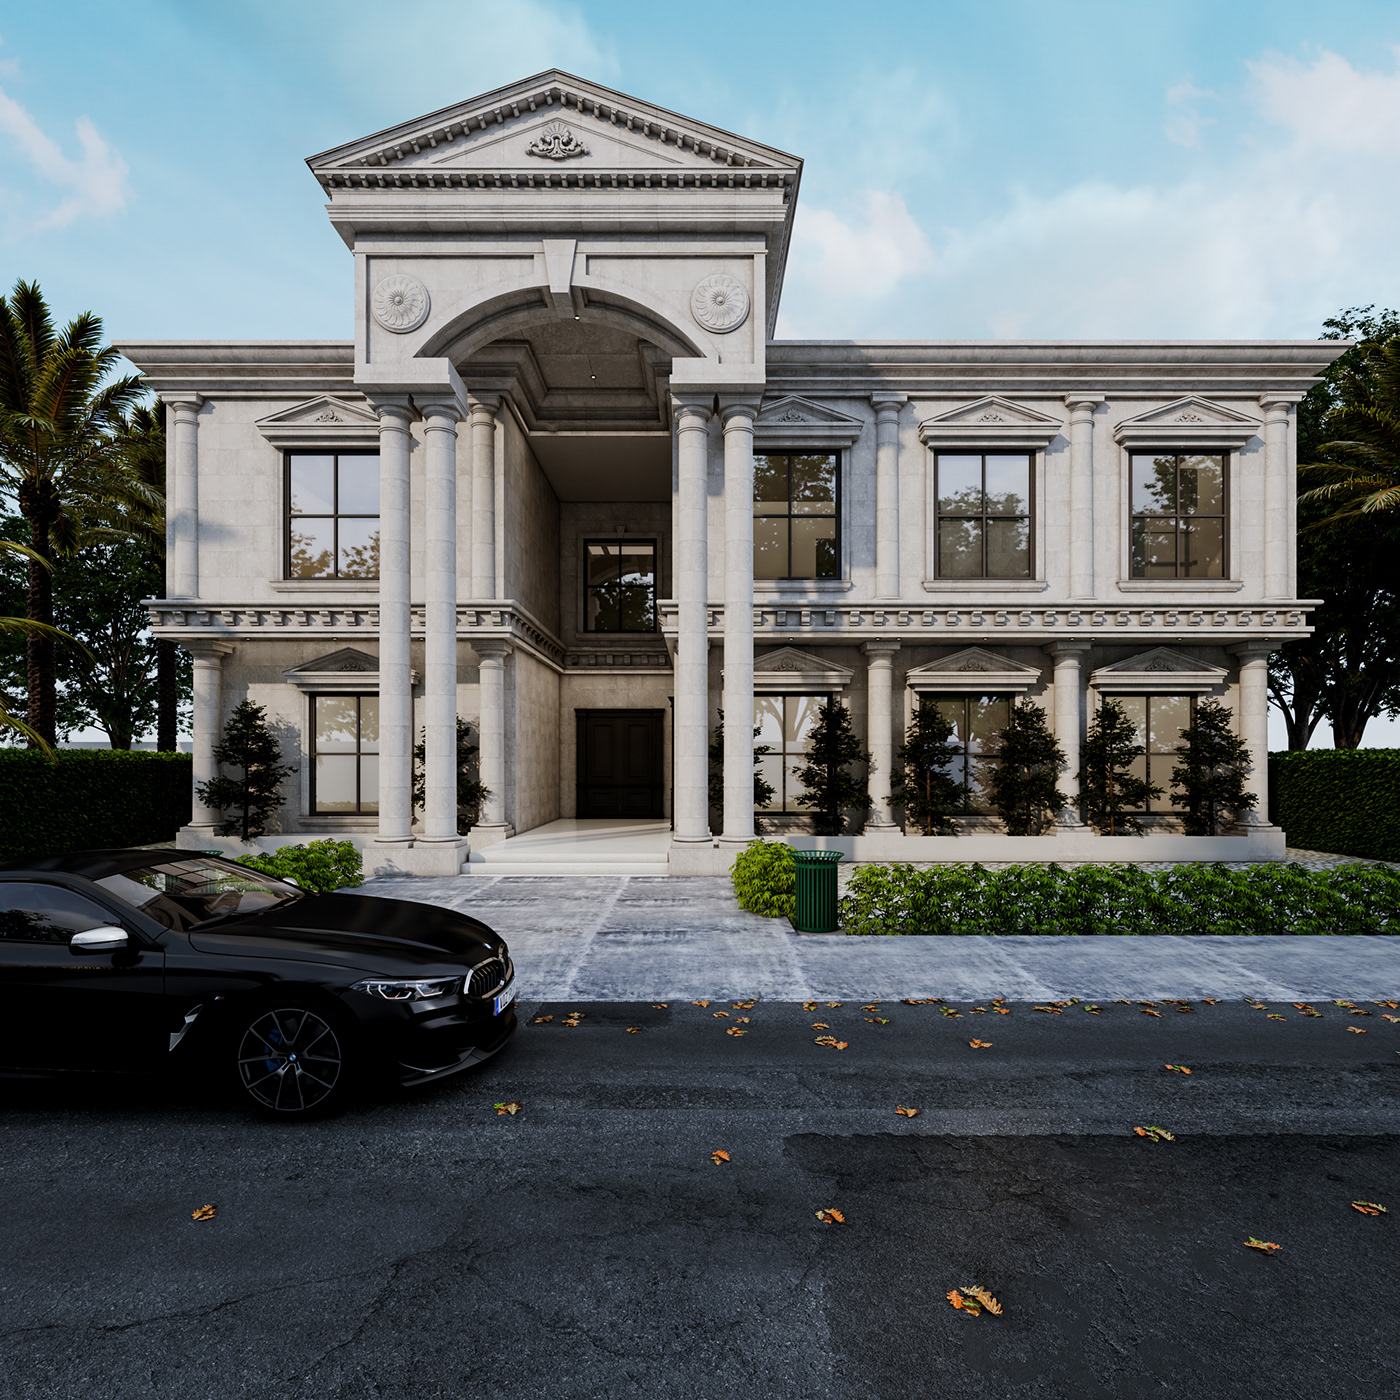 3d modeling 3dmax architecture architecture design classical architecture classical design Virtual reality vr